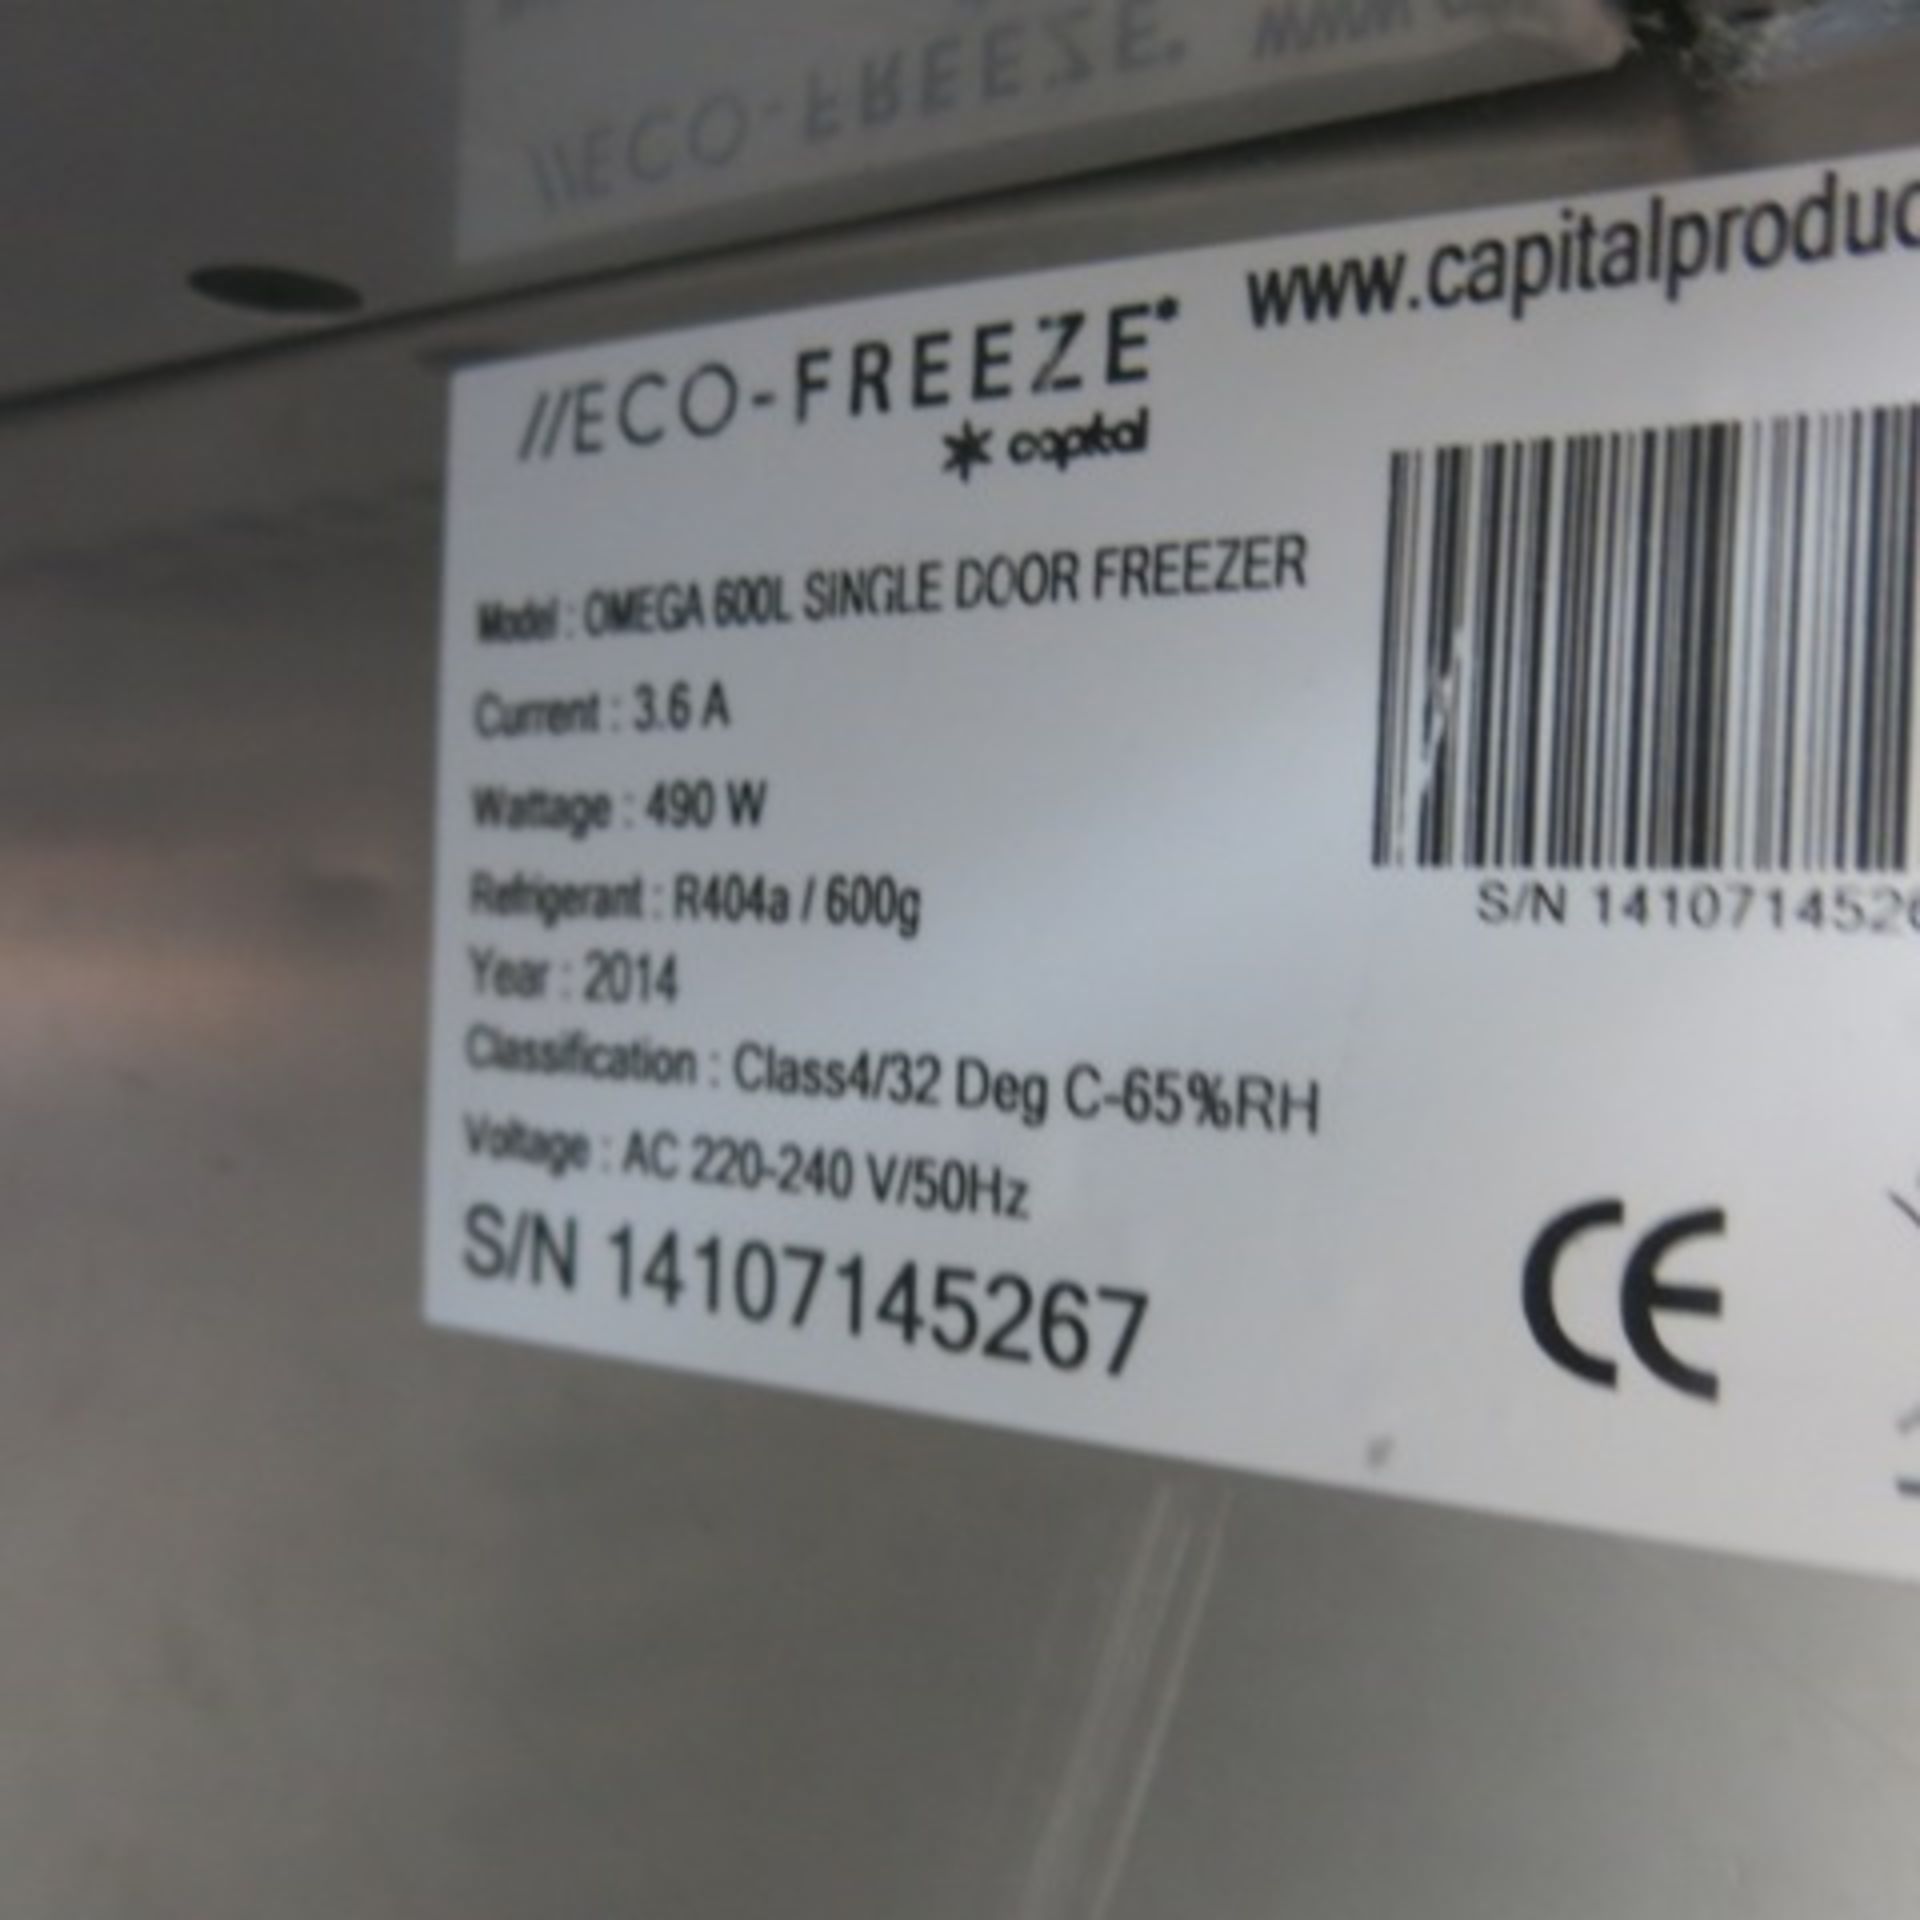 Capital Eco-Freeze Stainless Steel Single Door Upright Freezer, Model Omega 600l. Size (H)200 x (D) - Image 4 of 7